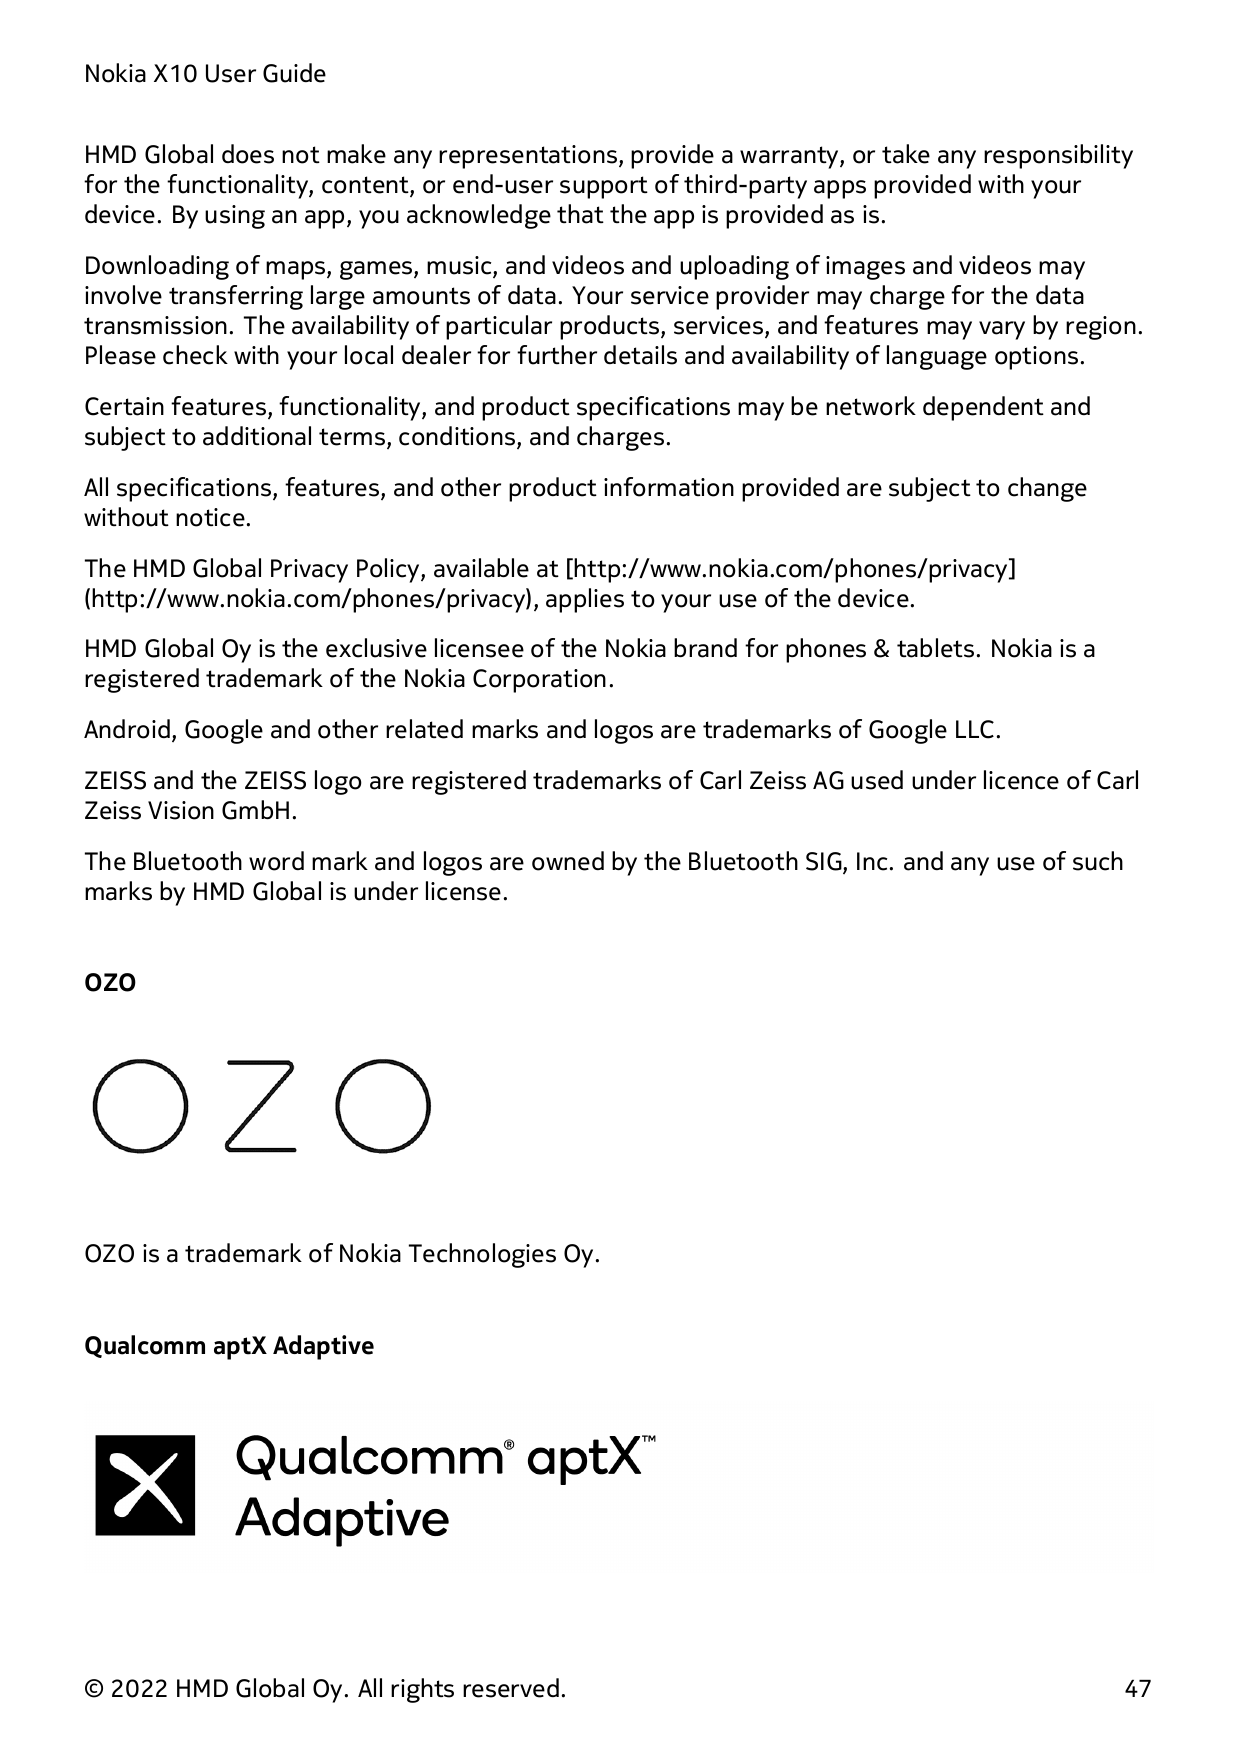 Nokia X10 User GuideHMD Global does not make any representations, provide a warranty, or take any responsibilityfor the function